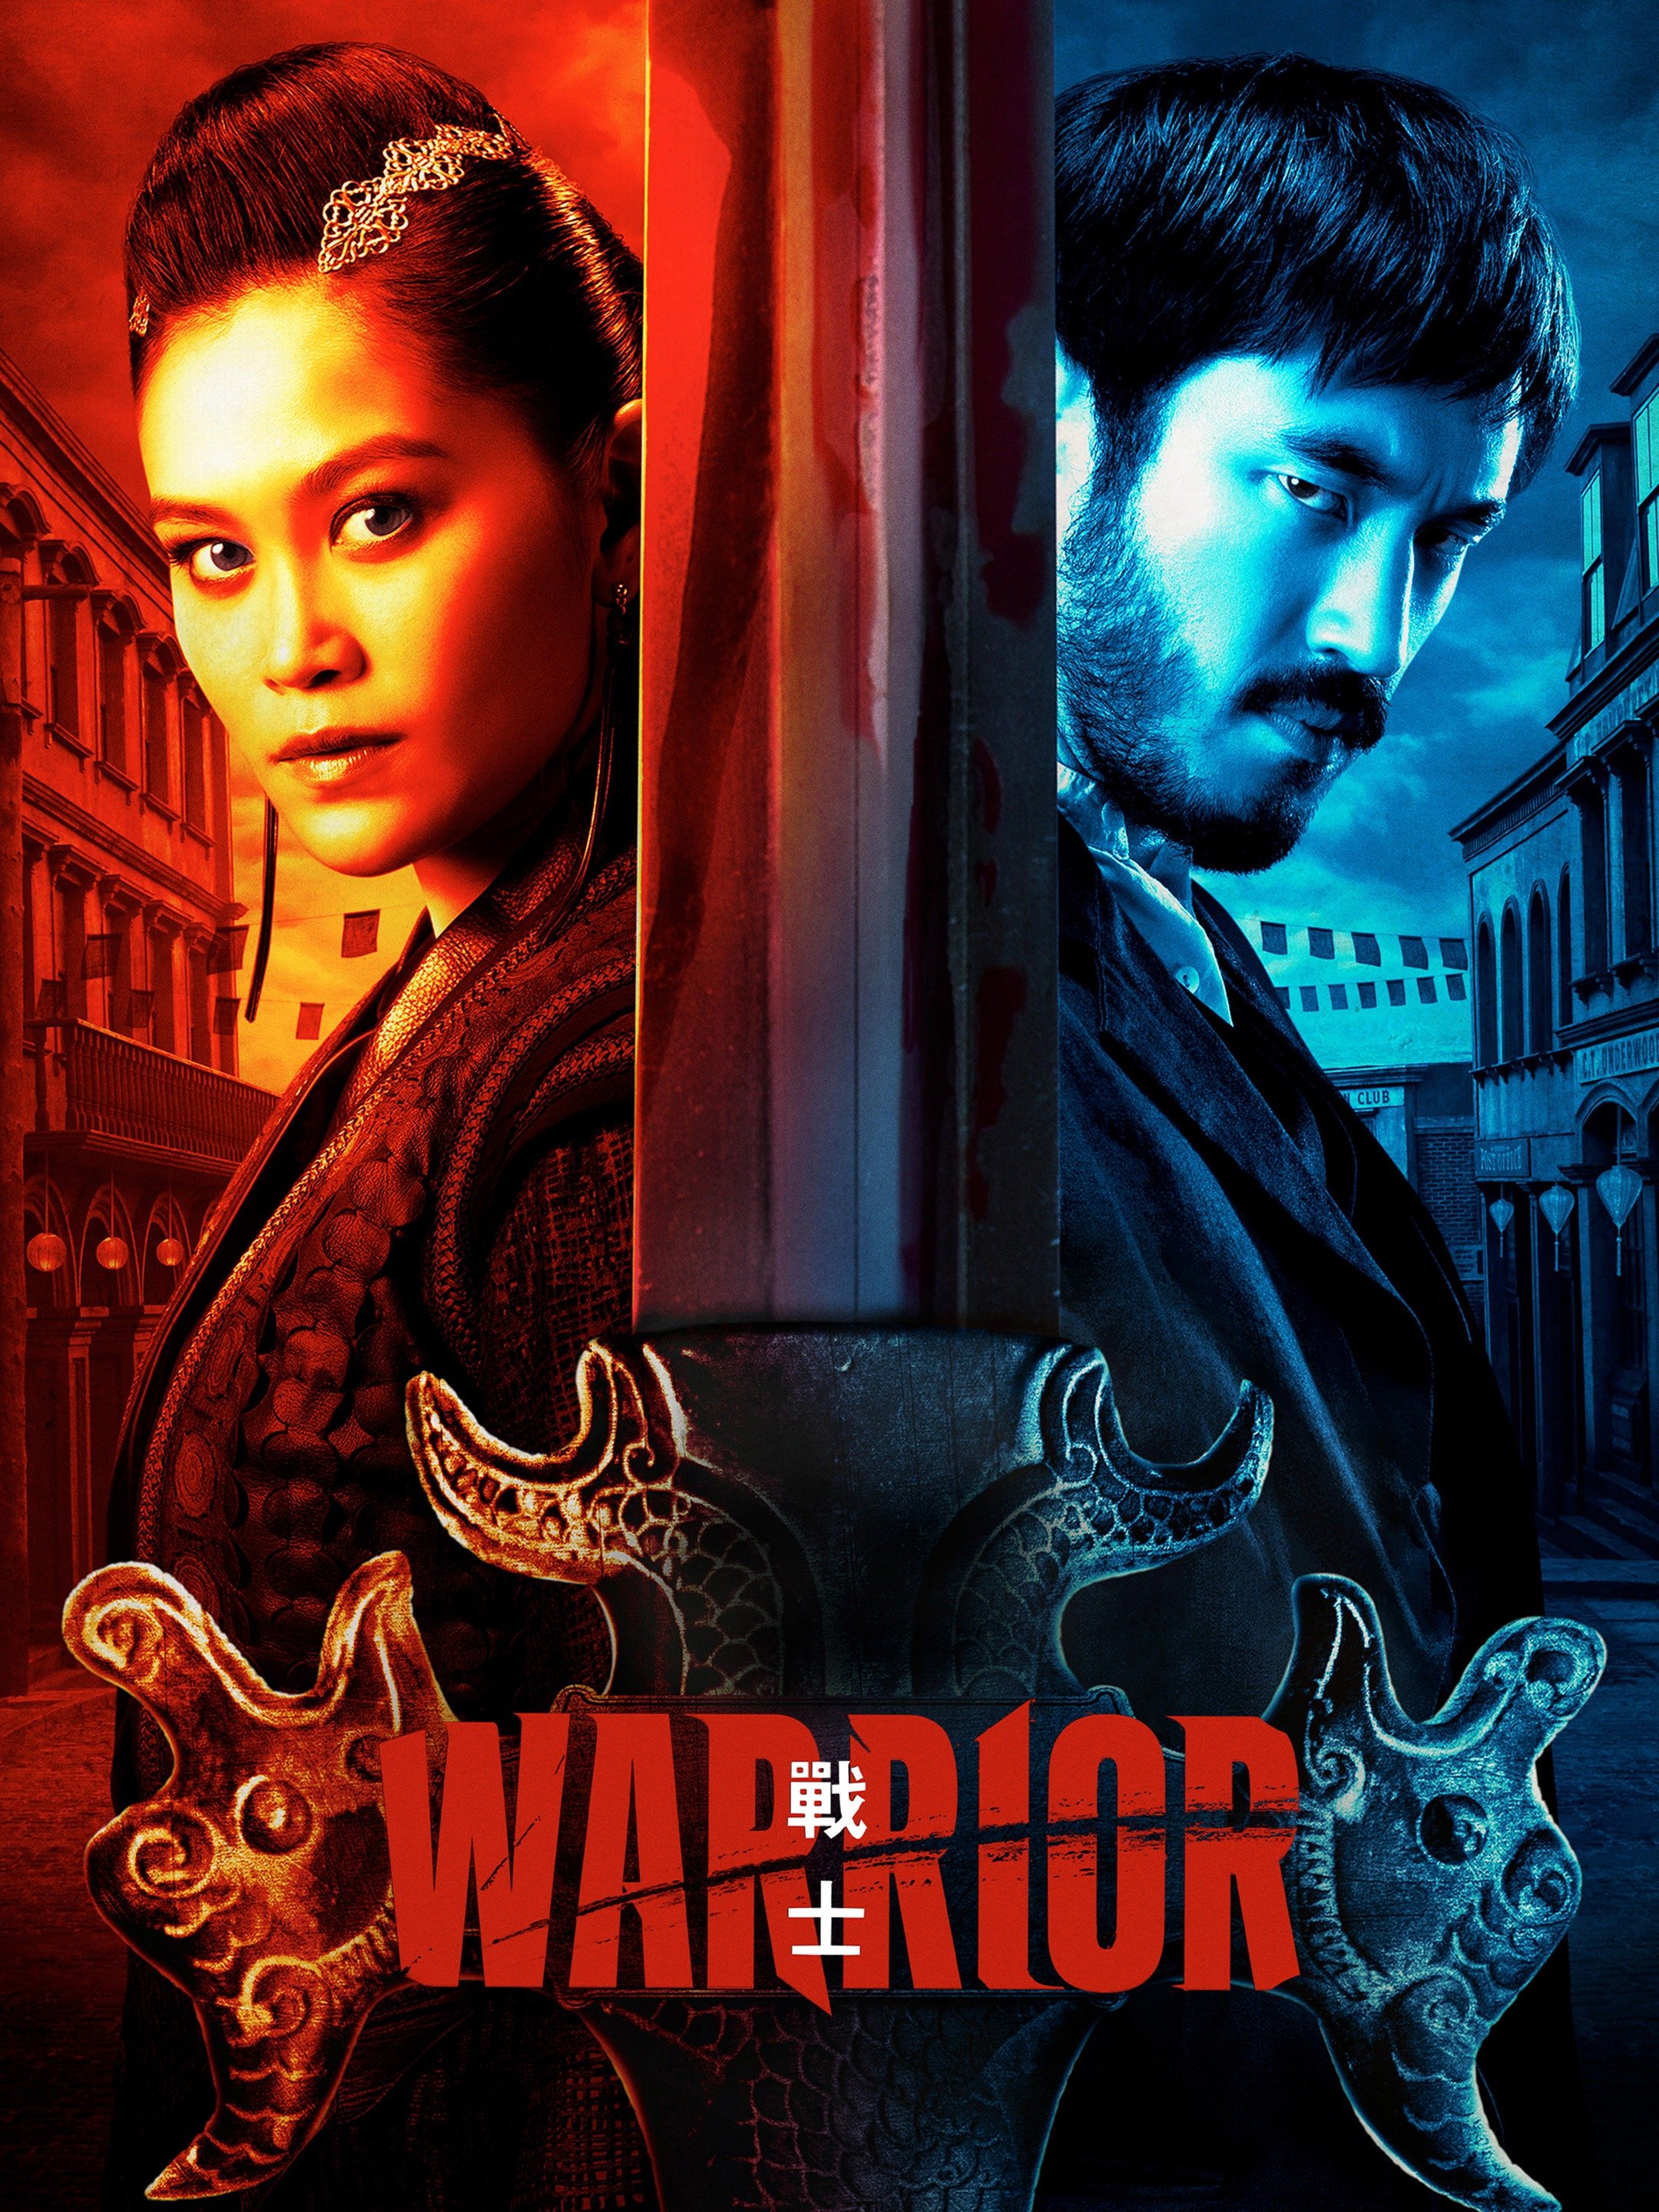 the king warrior movie review